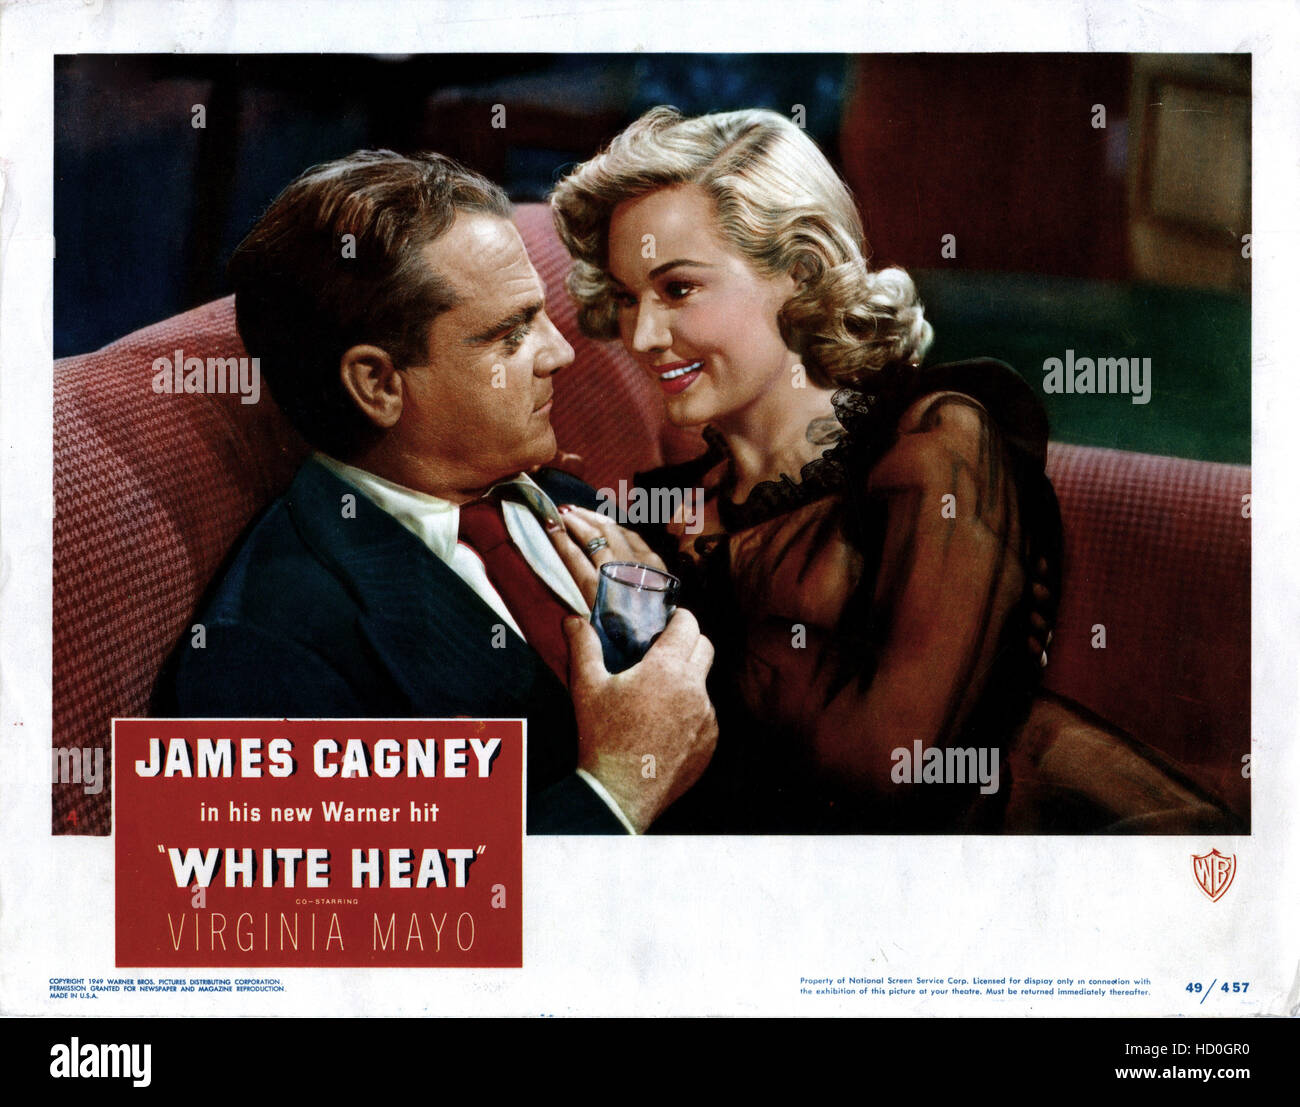 WHITE HEAT, from left, James Cagney, Virginia Mayo, 1949 Stock Photo